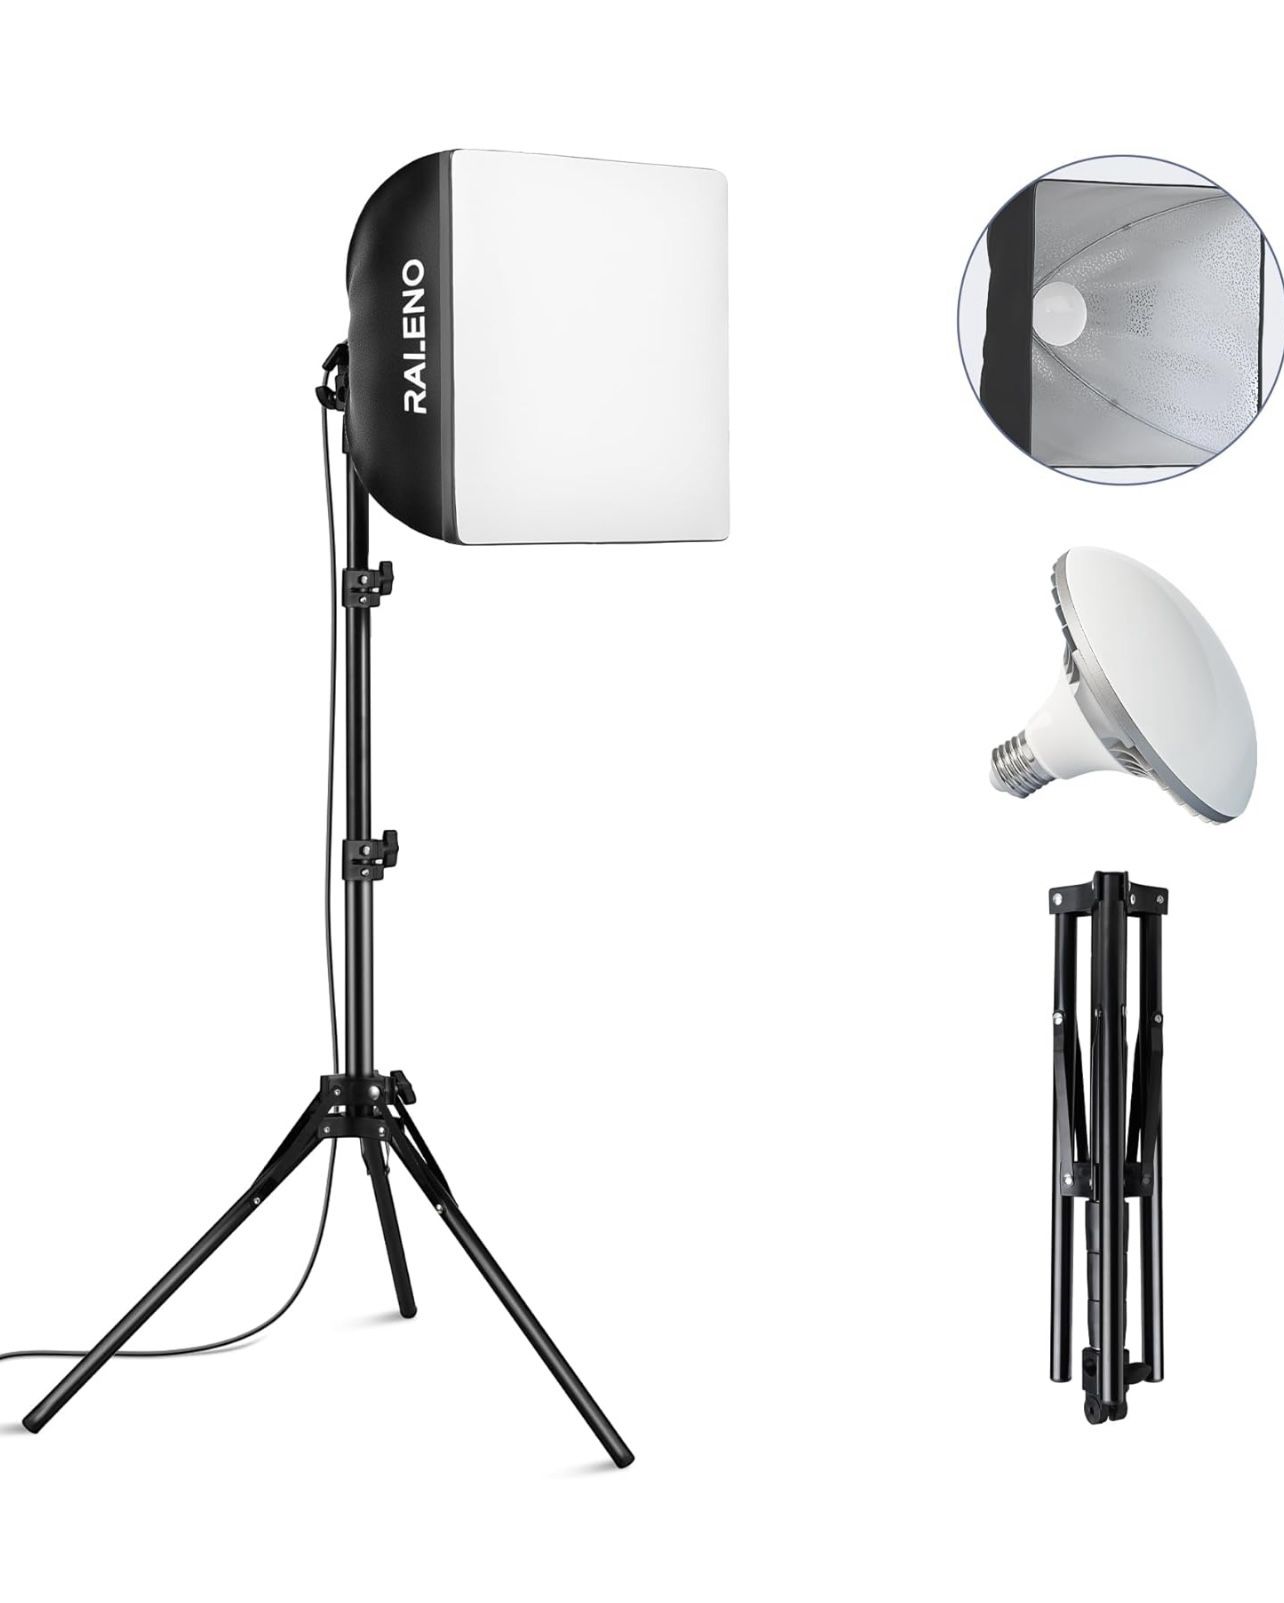 Softbox lighting kit w/ 2 backdrops and Stands.